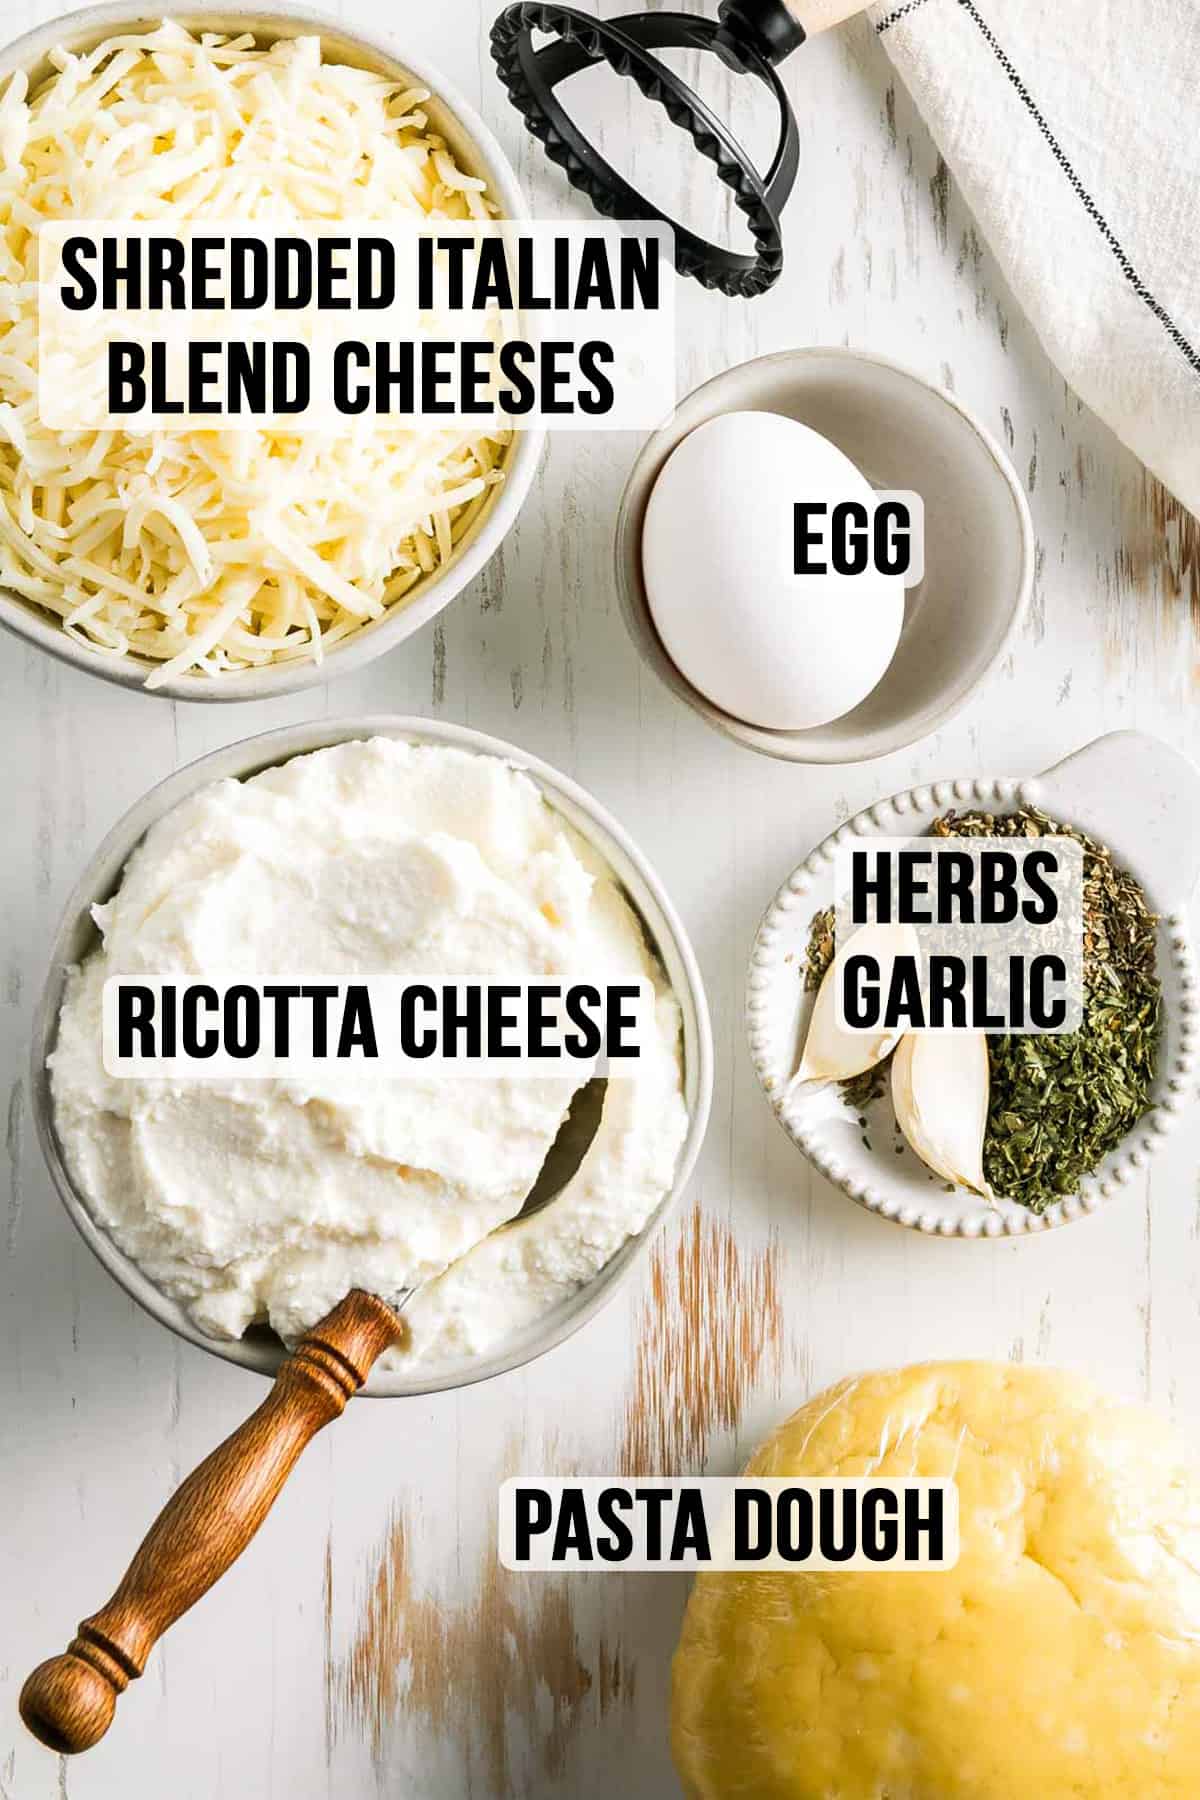 Ricotta cheese and shredded cheeses in a bowl next to egg, garlic, and herbs.